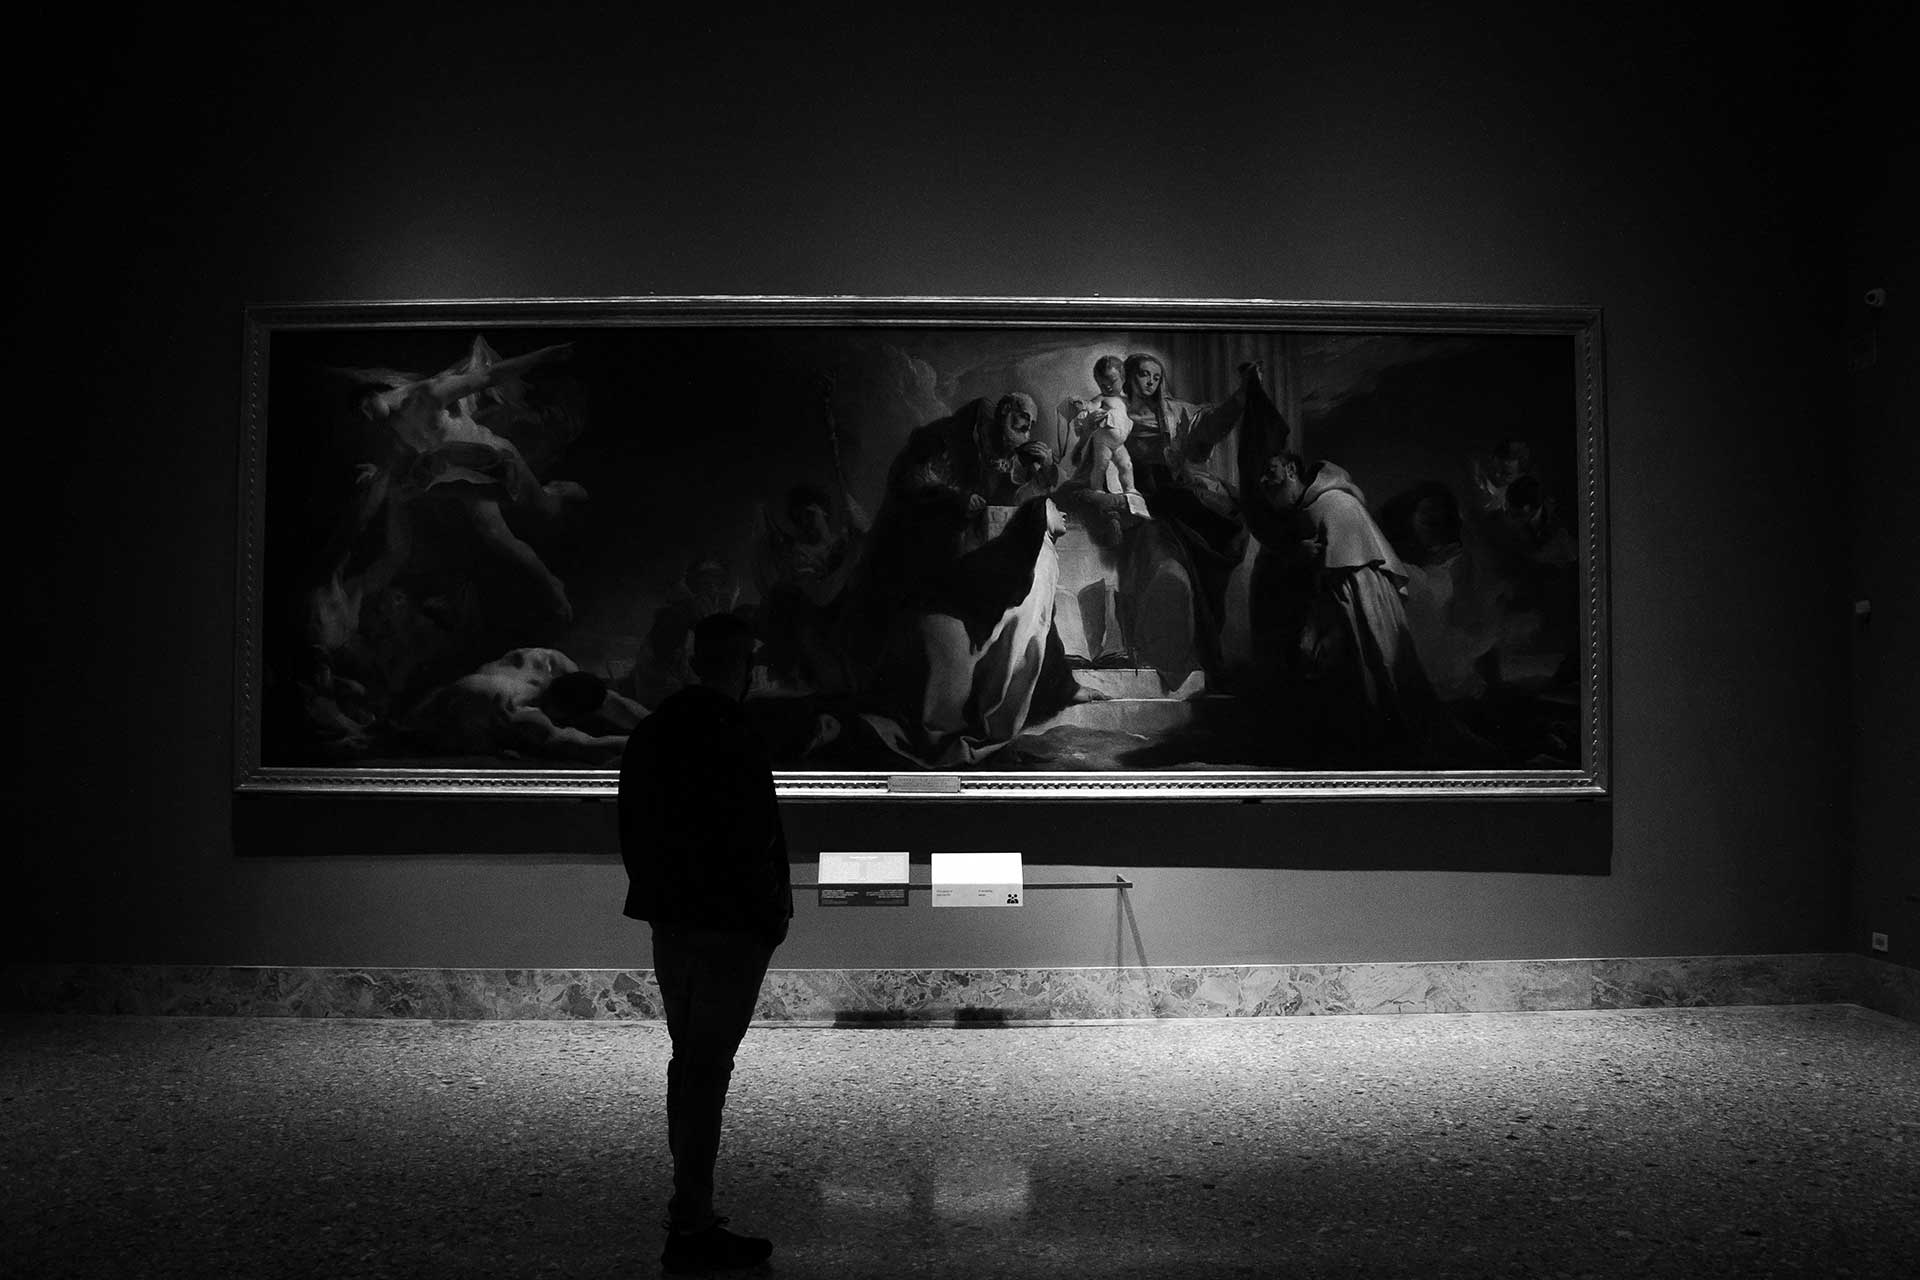 A person walkings through a gallery of fine art.